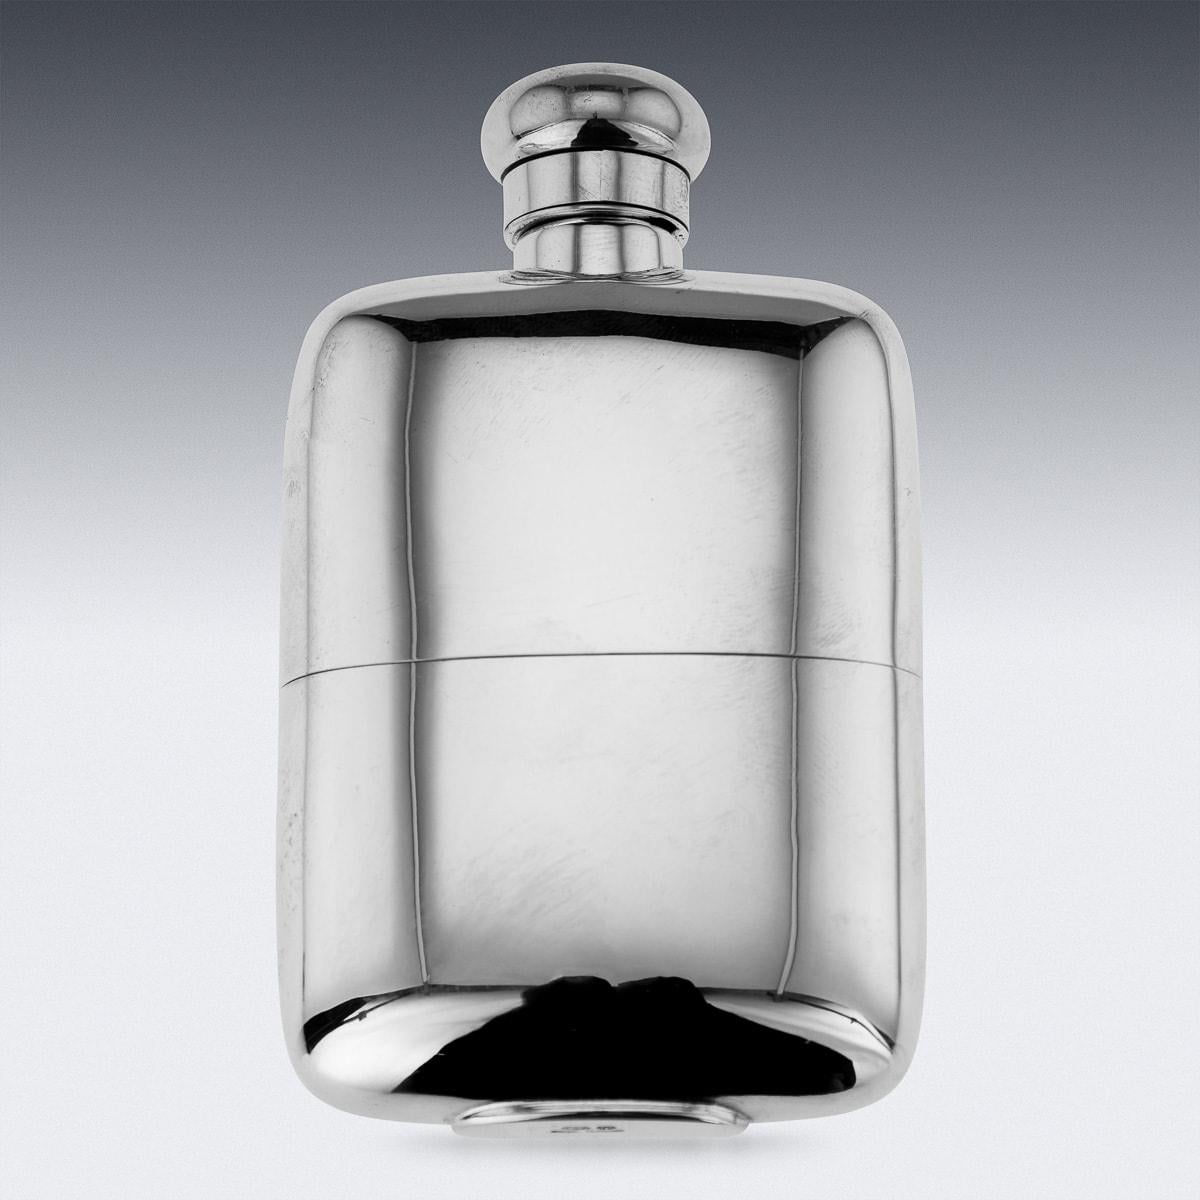 A superb late 20th Century Italian solid silver hip flask with silver hinged top. Beautifully created in a smooth overall finish with a detachable cup. Hallmarked Italian export silver (925 standard), Florence. Later English Import marks for,